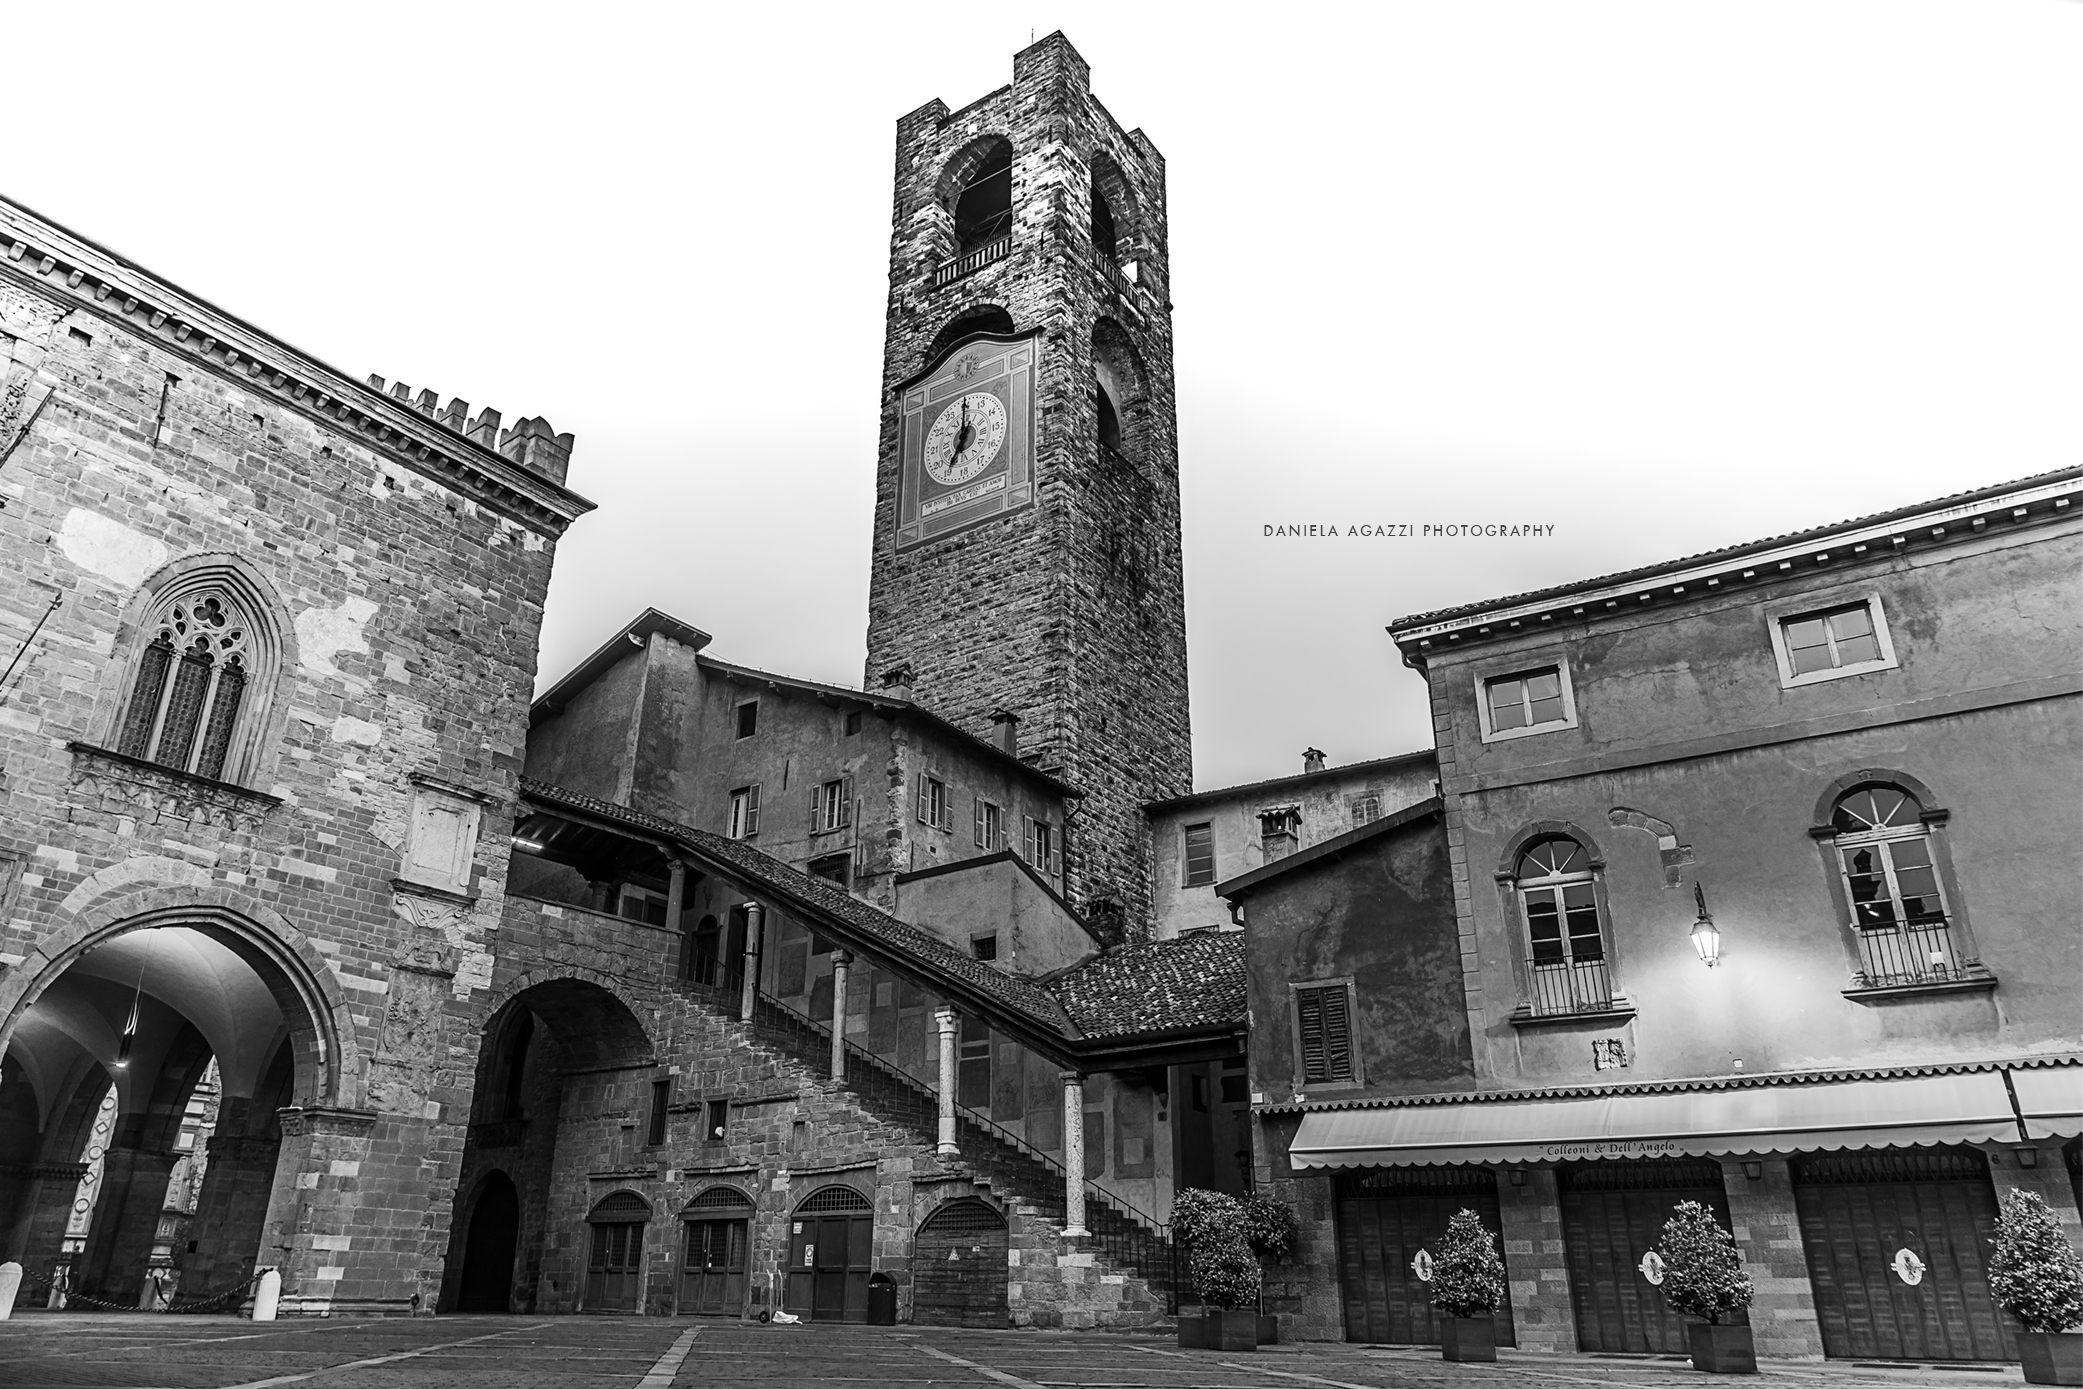 The bell tower of Bergamo...